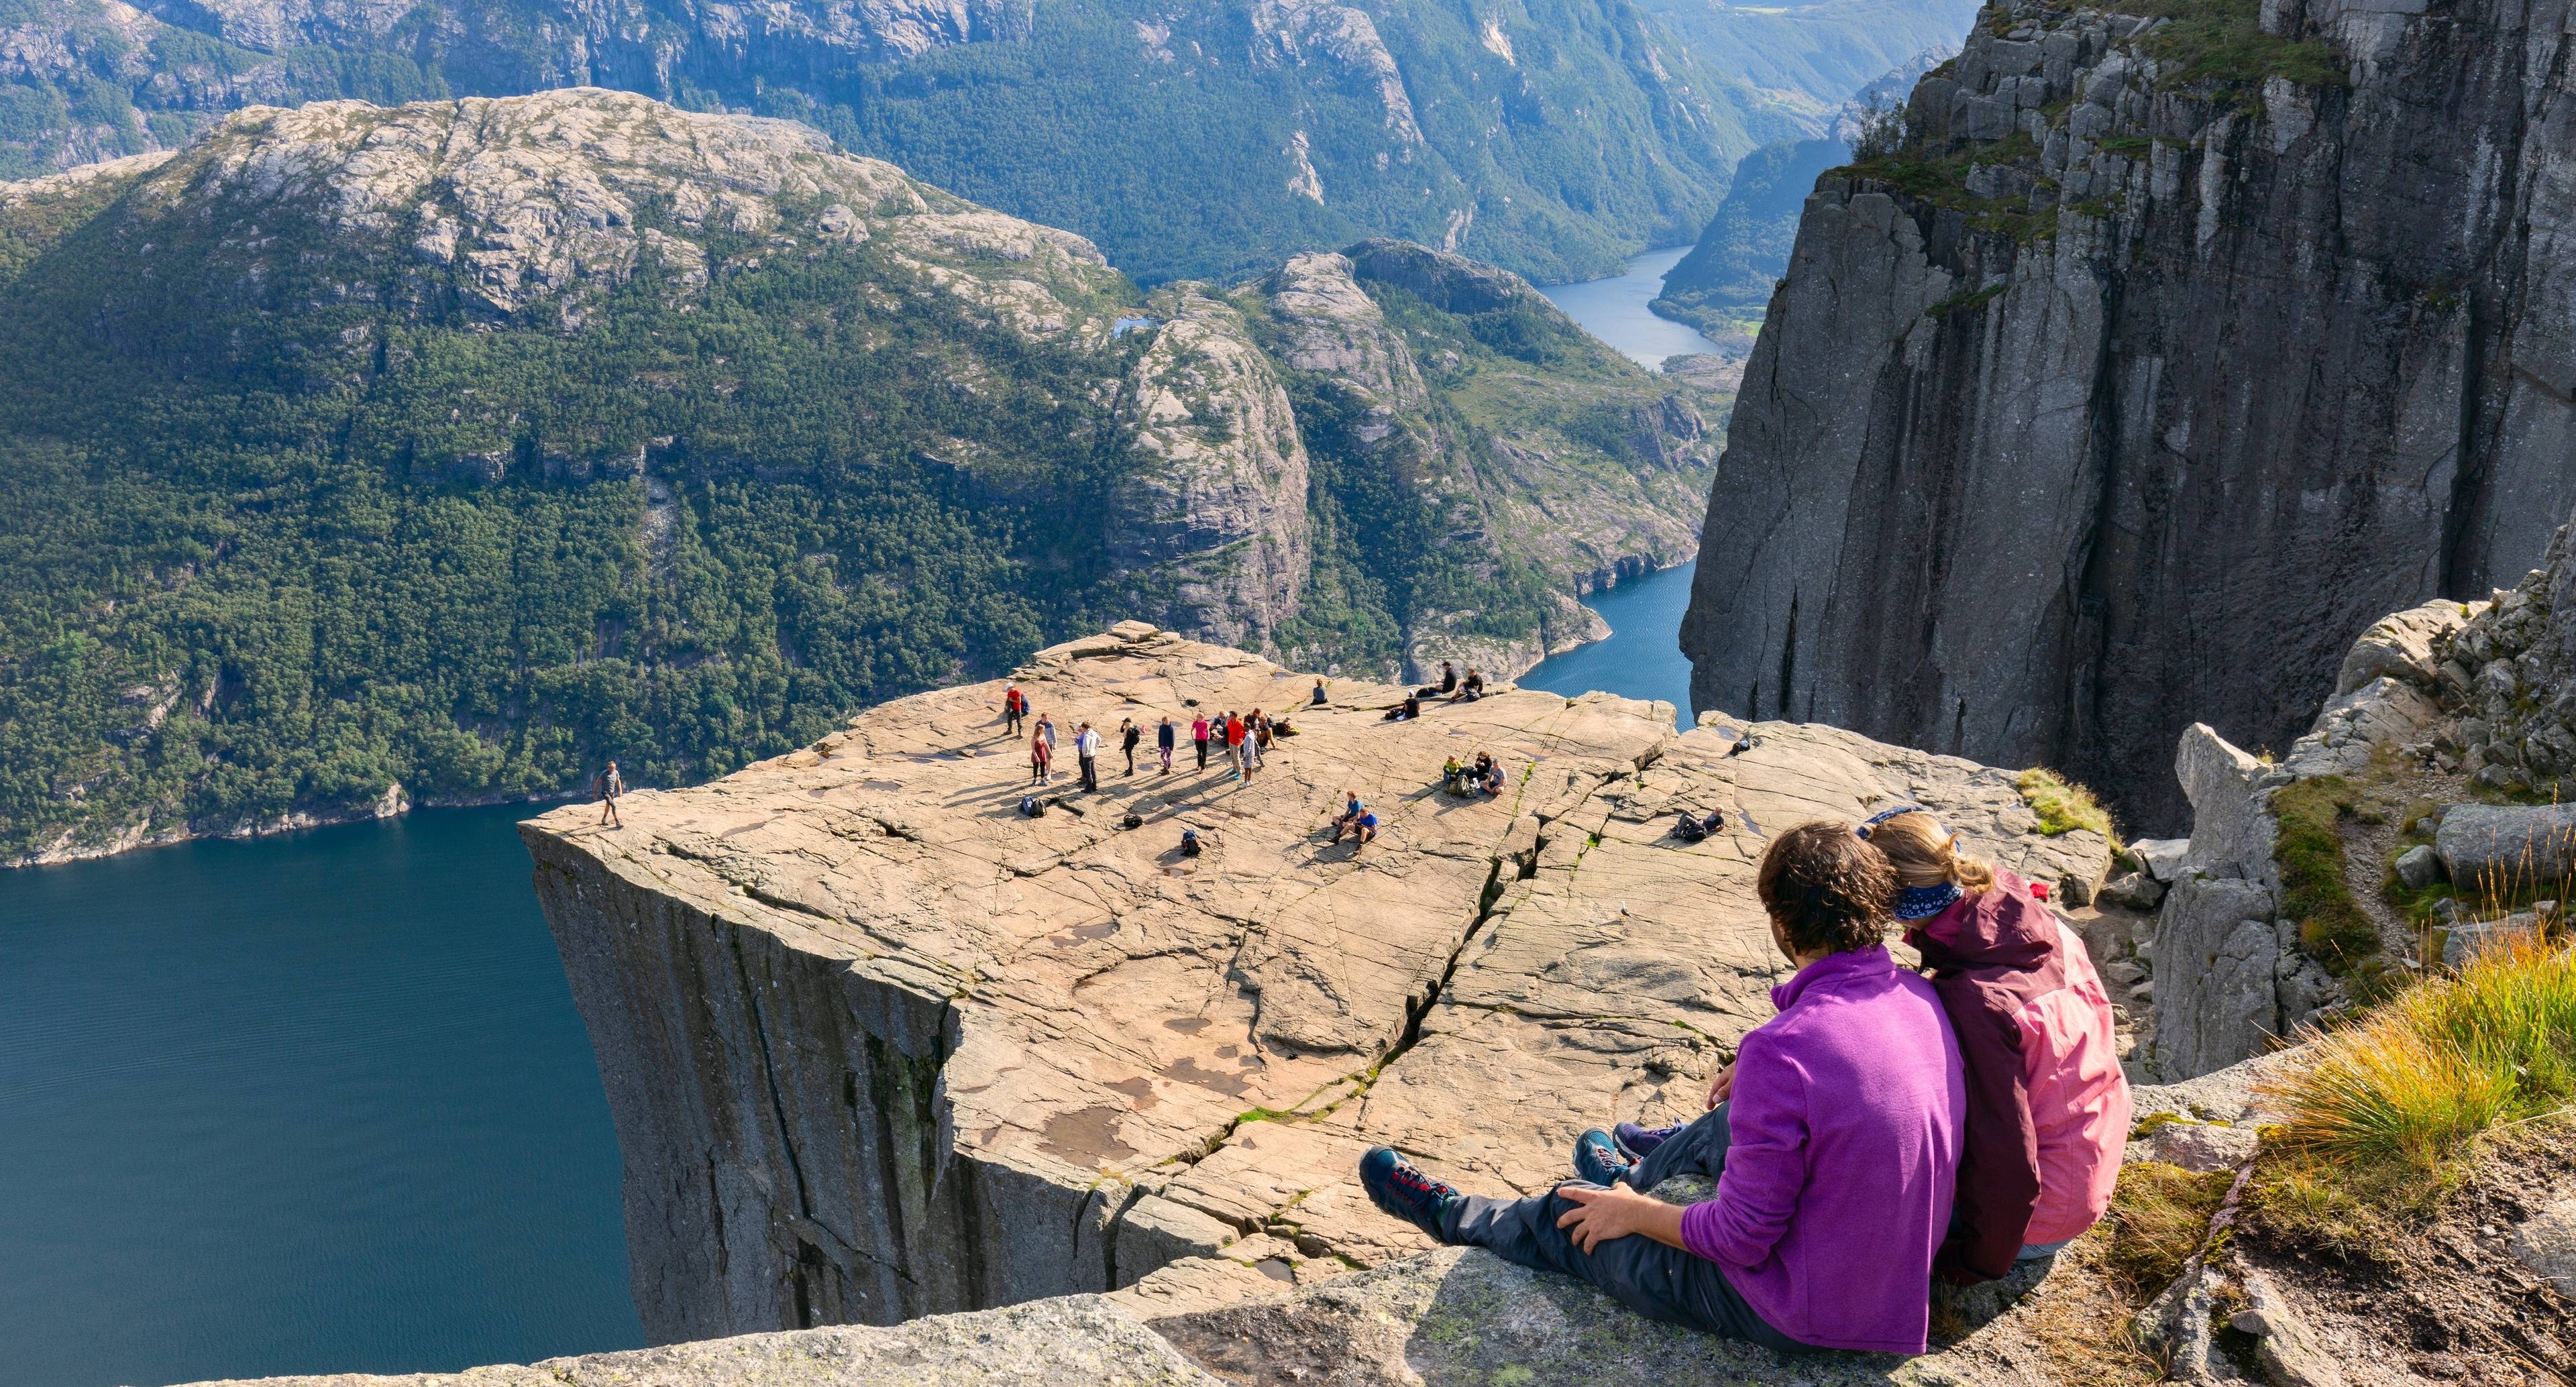 Panoramic Views From the Top of Preikestolen